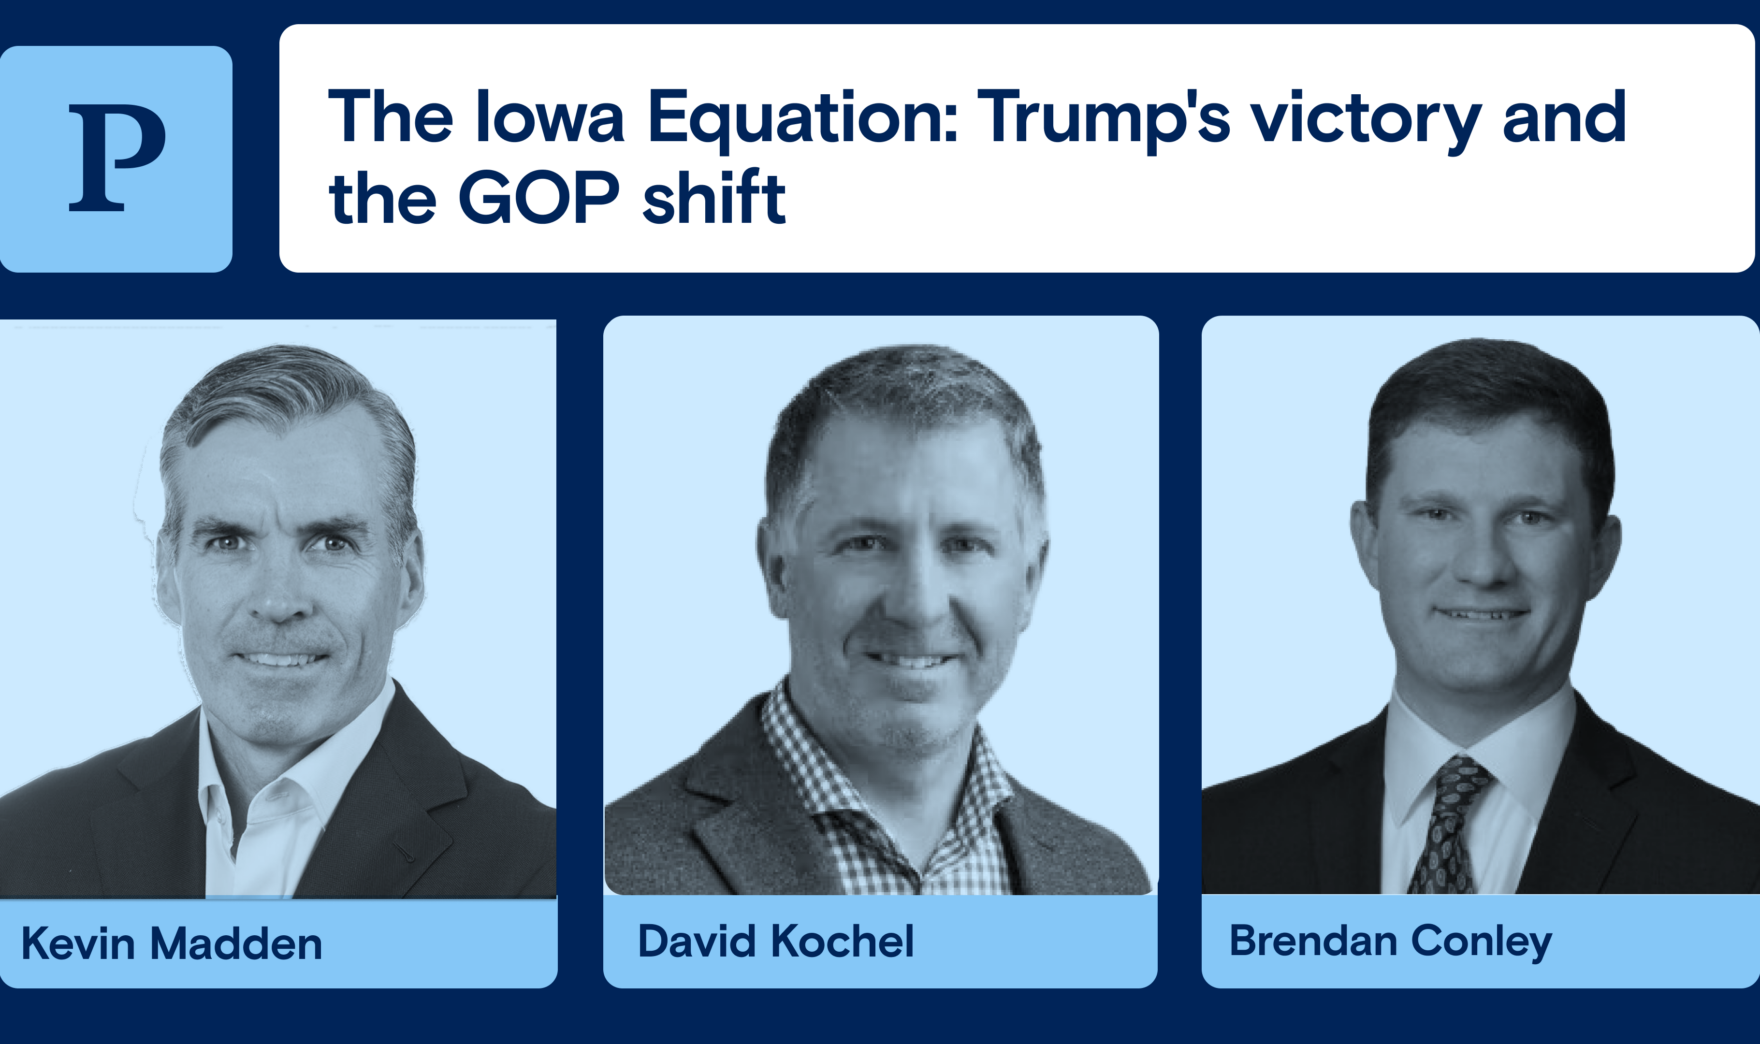 The Iowa Equation: Trump’s victory and the GOP shift